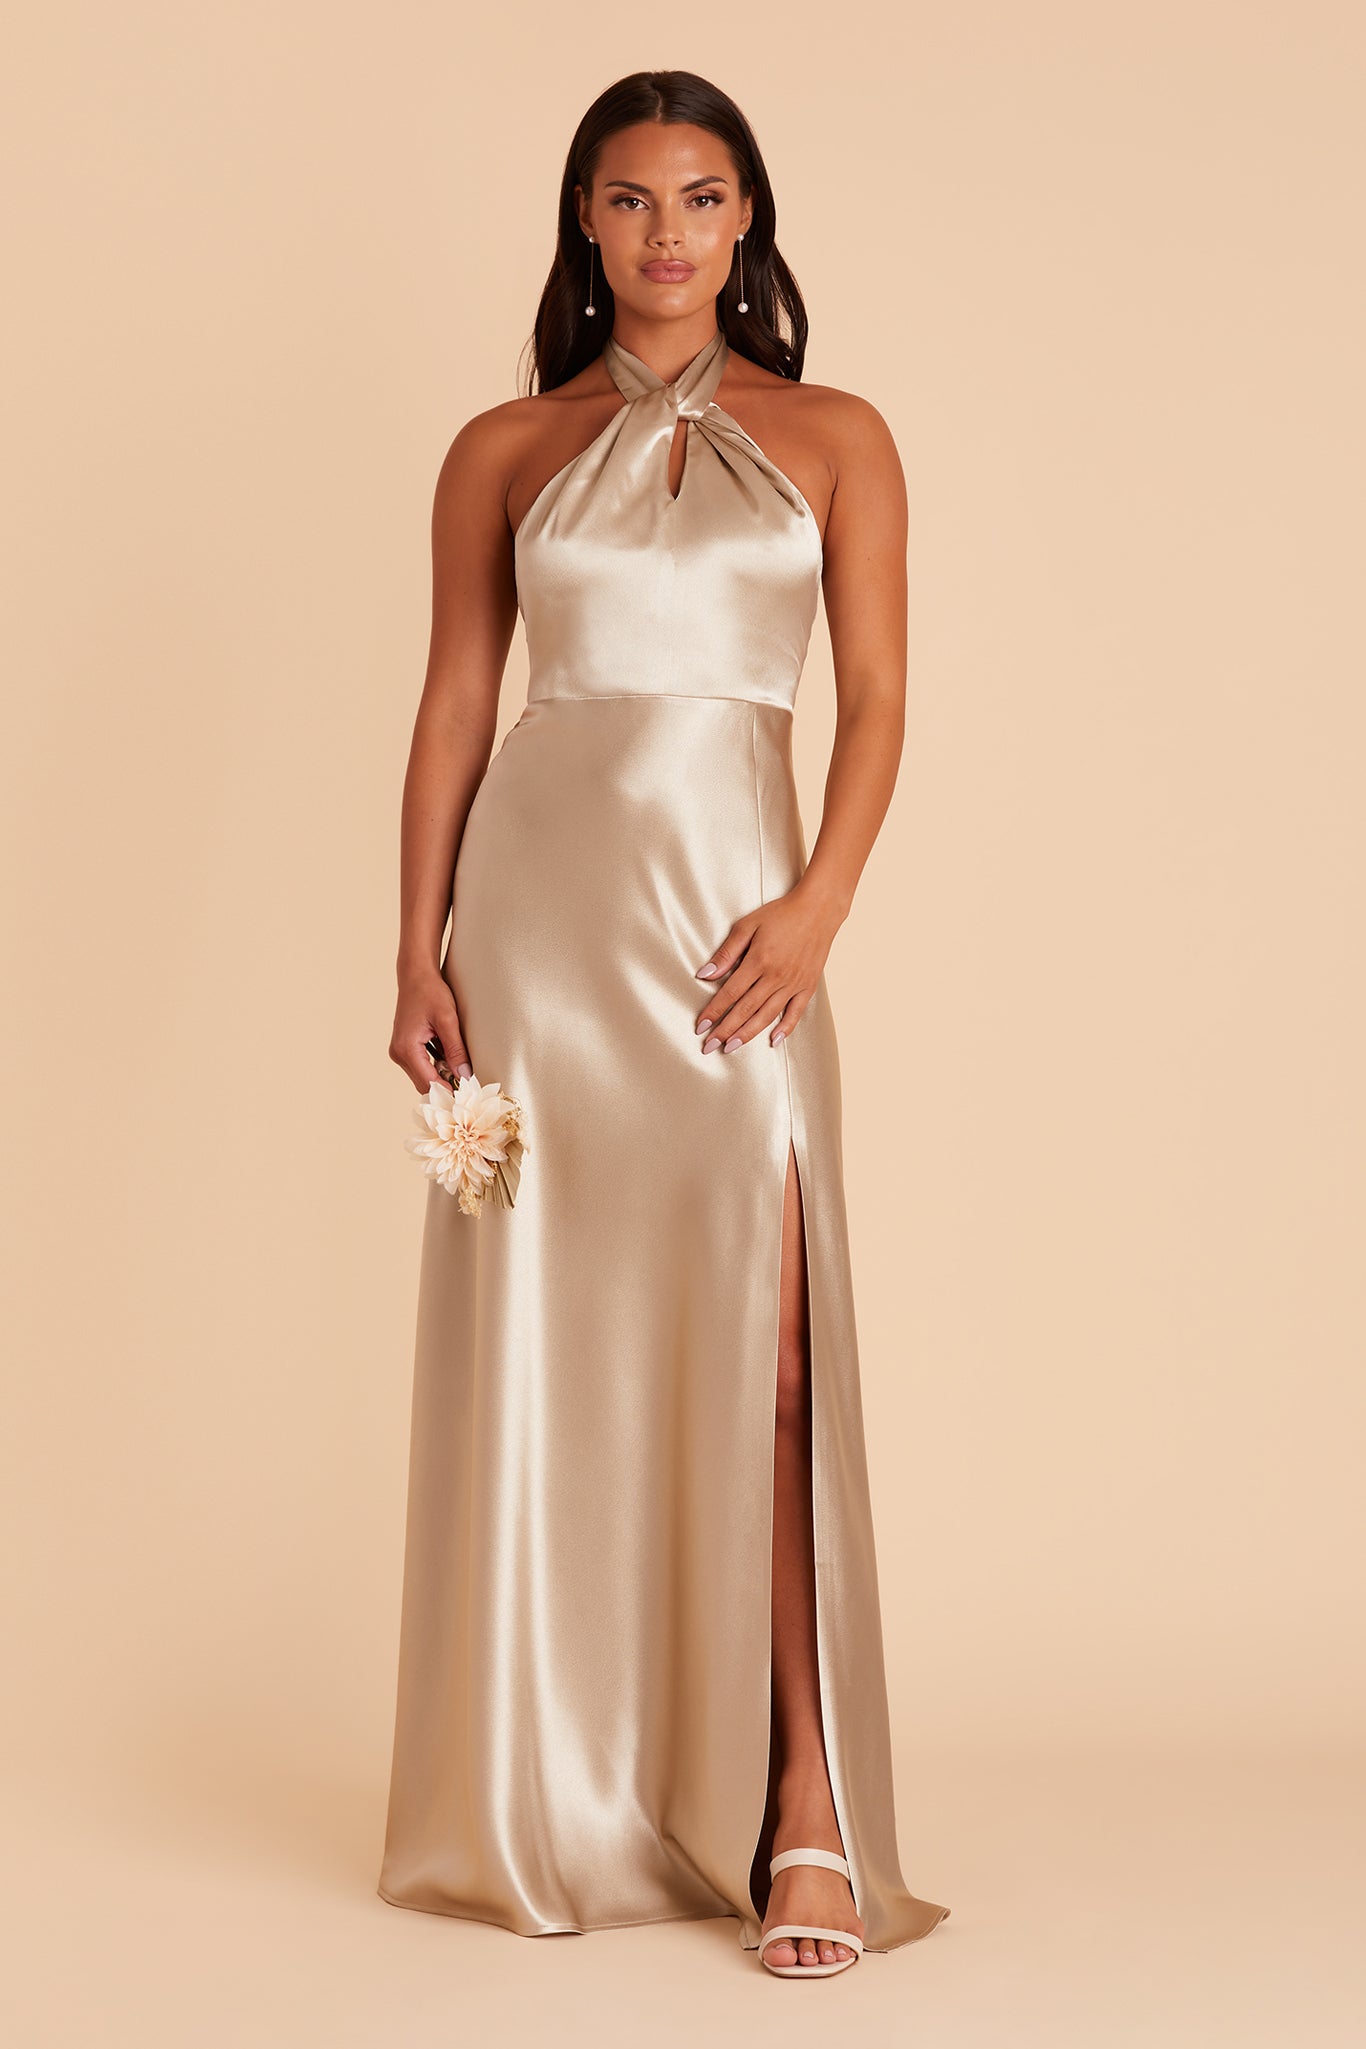 Front view of the Monica Dress in neutral champagne satin shows the model revealing their leg and foot through the dress slit. The model wears the Low Alby Heel shoe.